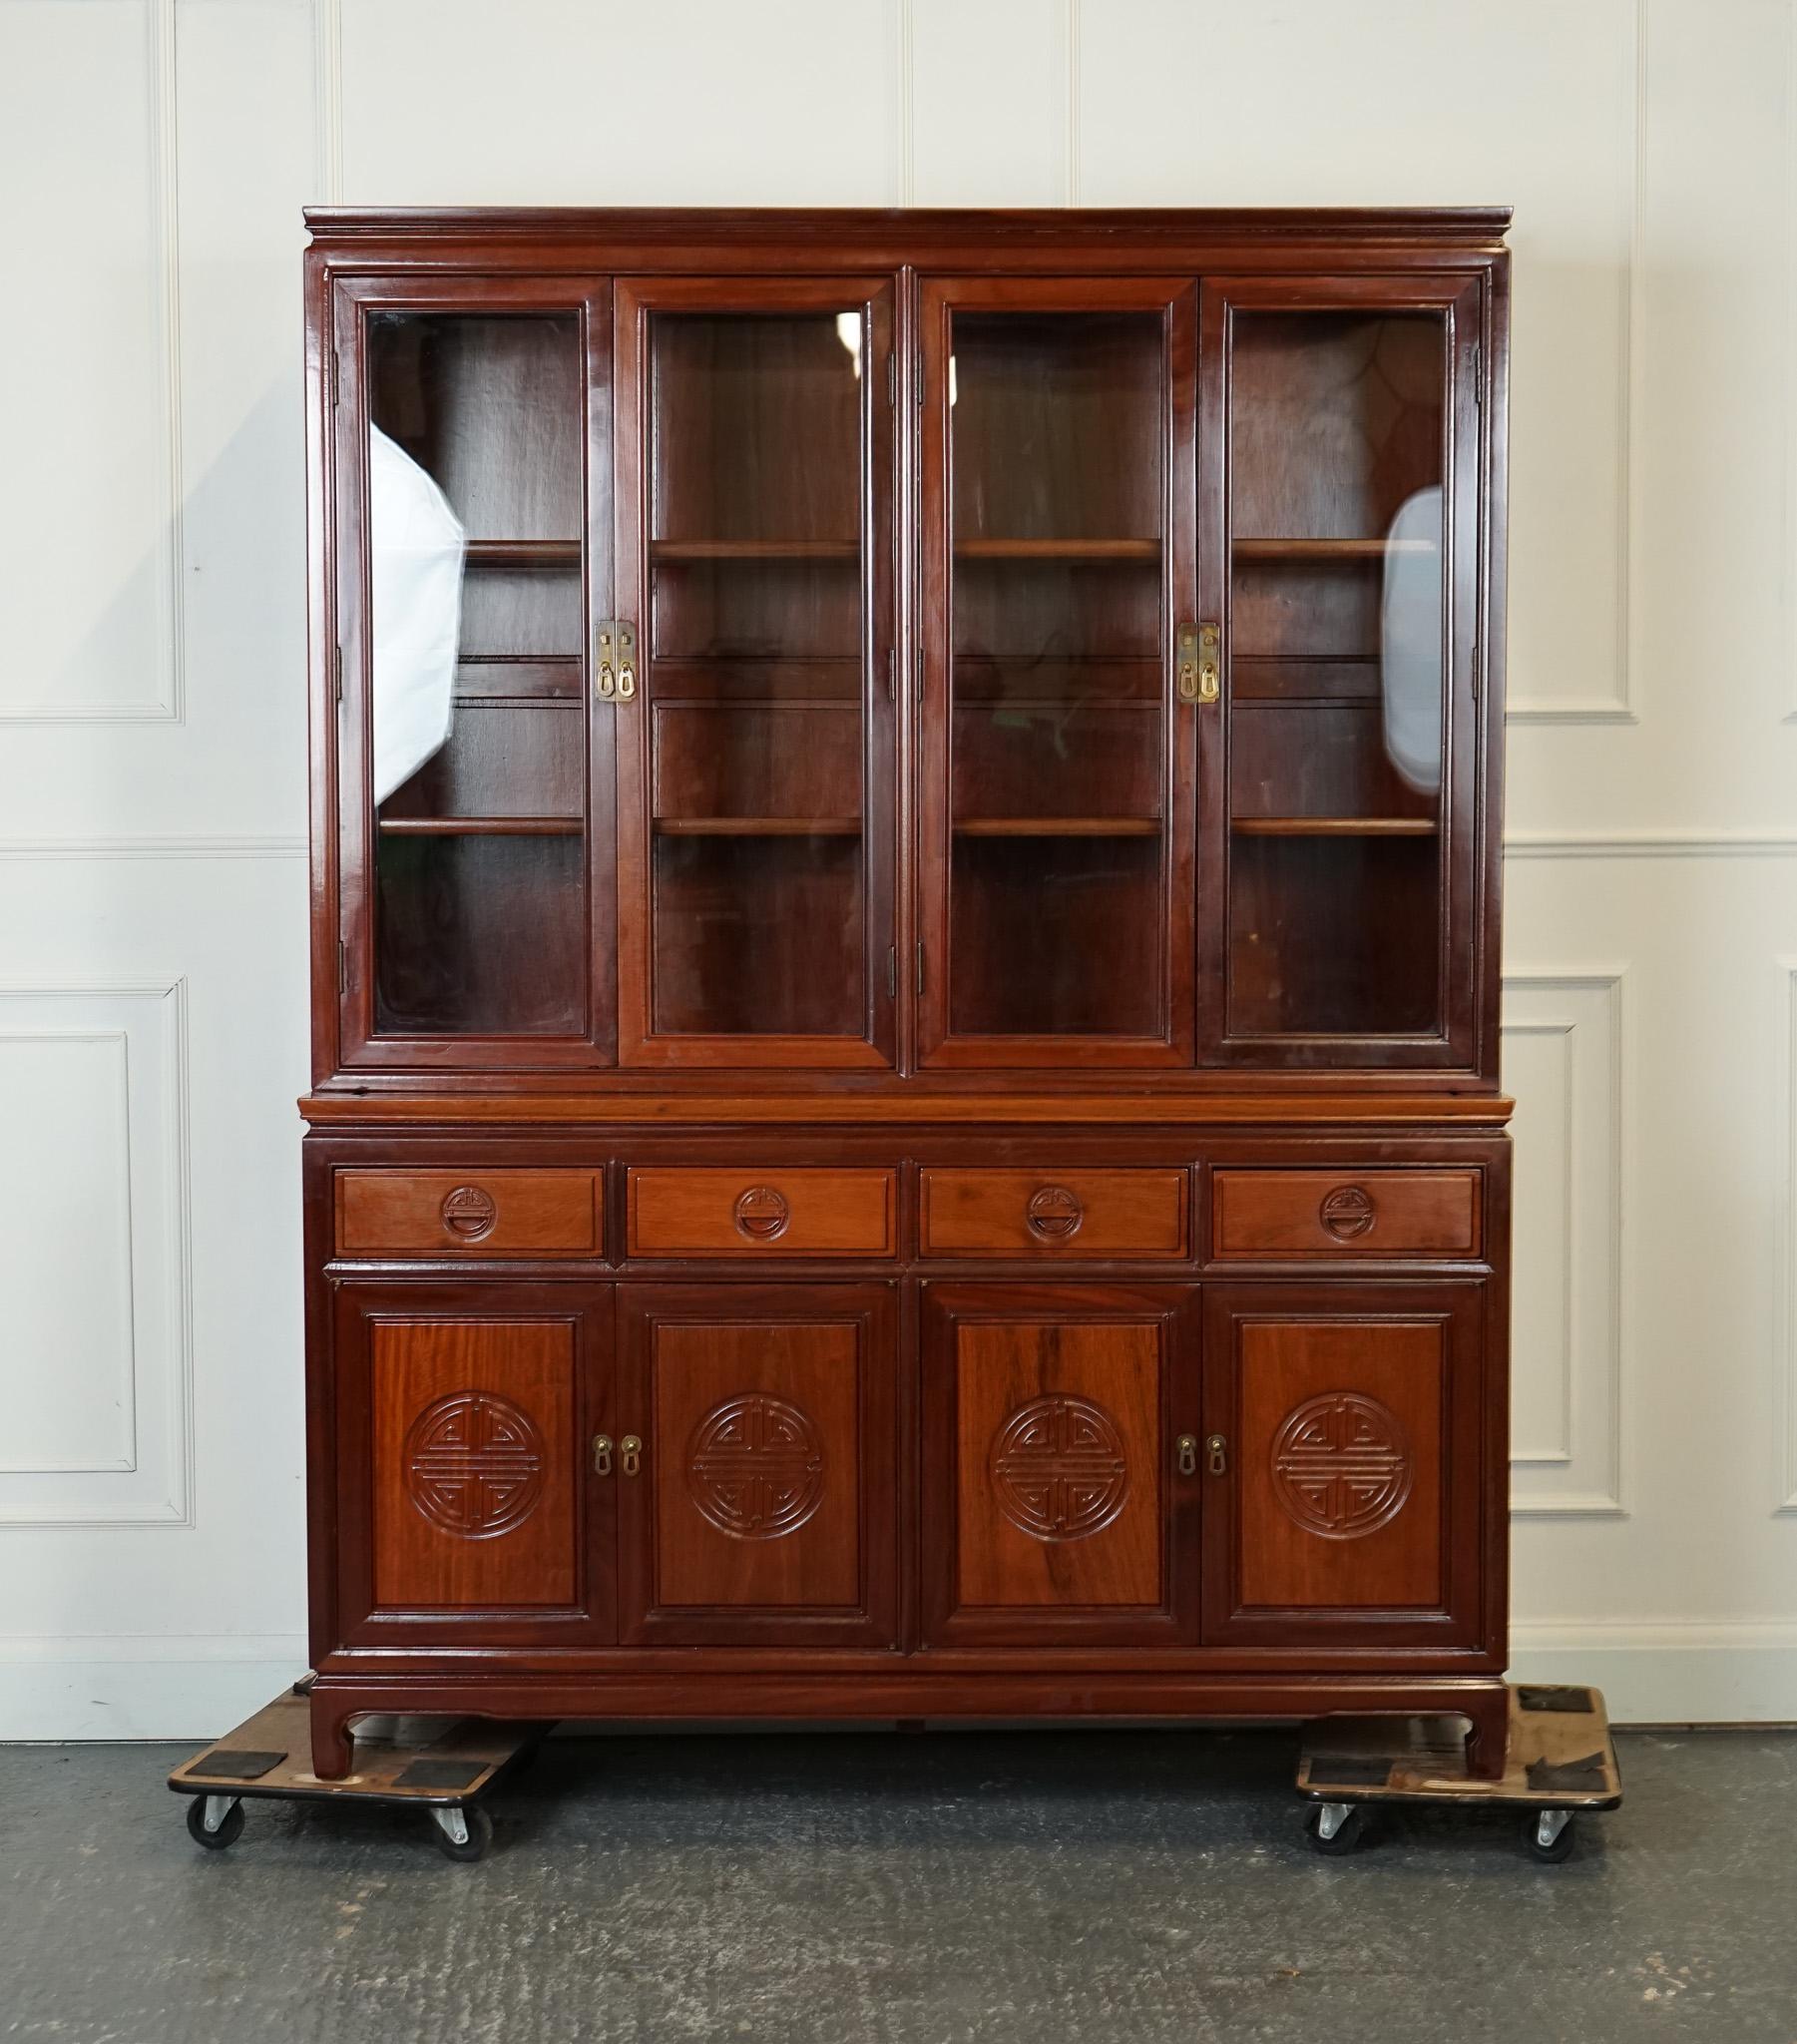 
We are delighted to offer for sale this Oriental Chinese Carved Solid Hardwood Display Cabinet.

This large vintage Oriental Chinese carved solid Hardwood bookcase display cabinet is a magnificent piece that exudes elegance and craftsmanship. Made